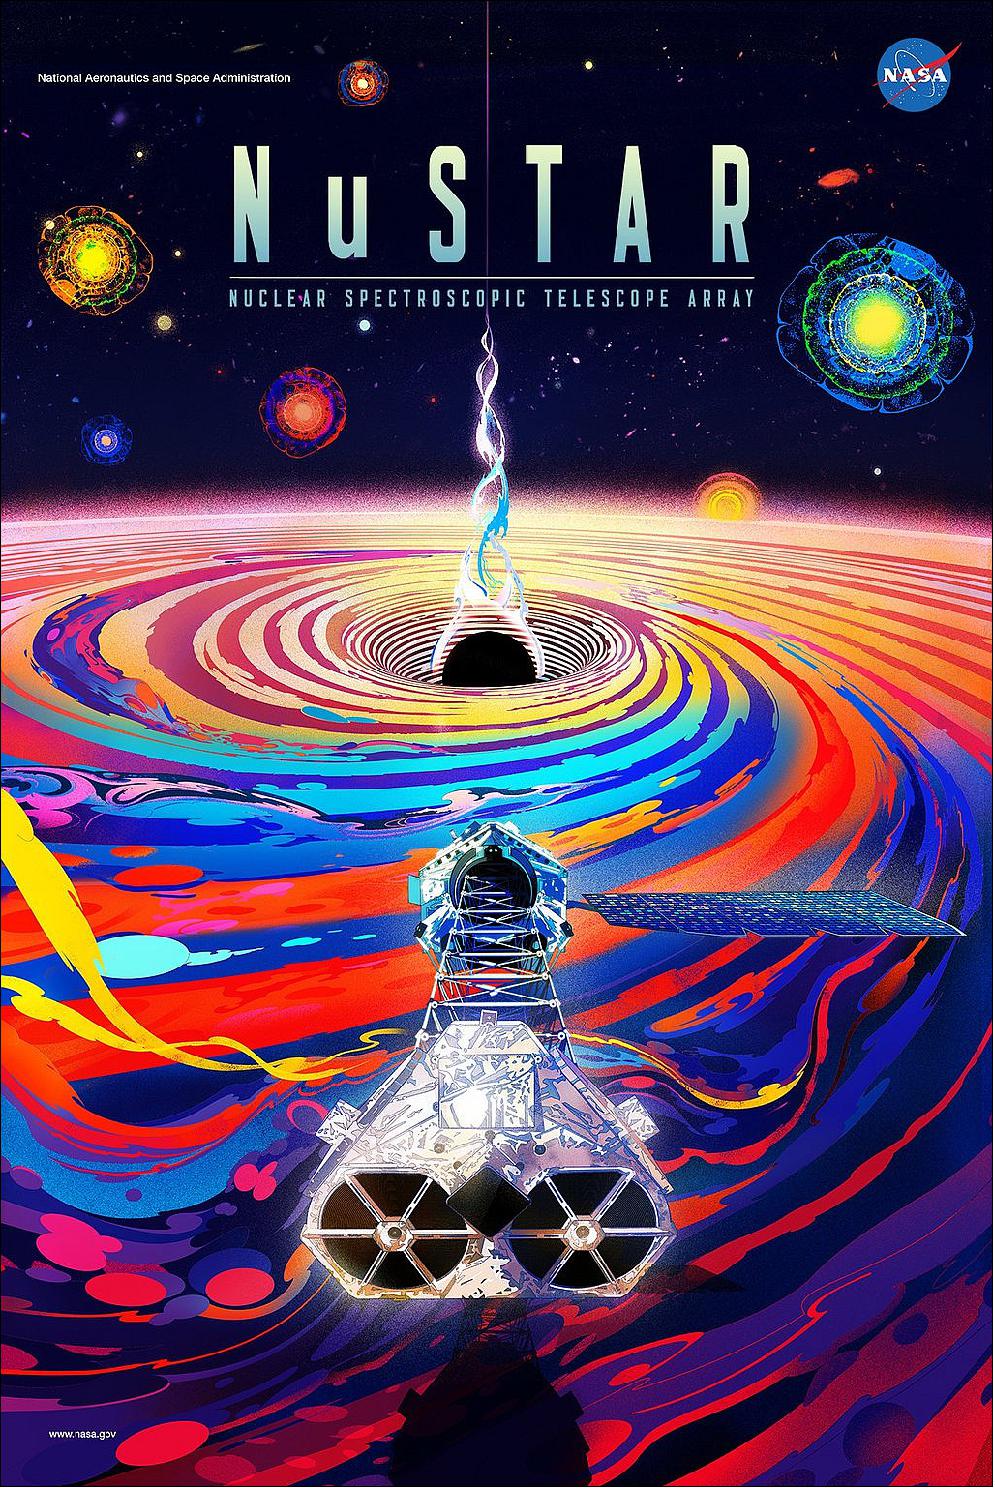 Figure 13: NuSTAR is the first space telescope able to focus high-energy X-rays. This colorful poster was made in celebration of the mission's 10-year anniversary (image credit: NASA/JPL-Caltech)